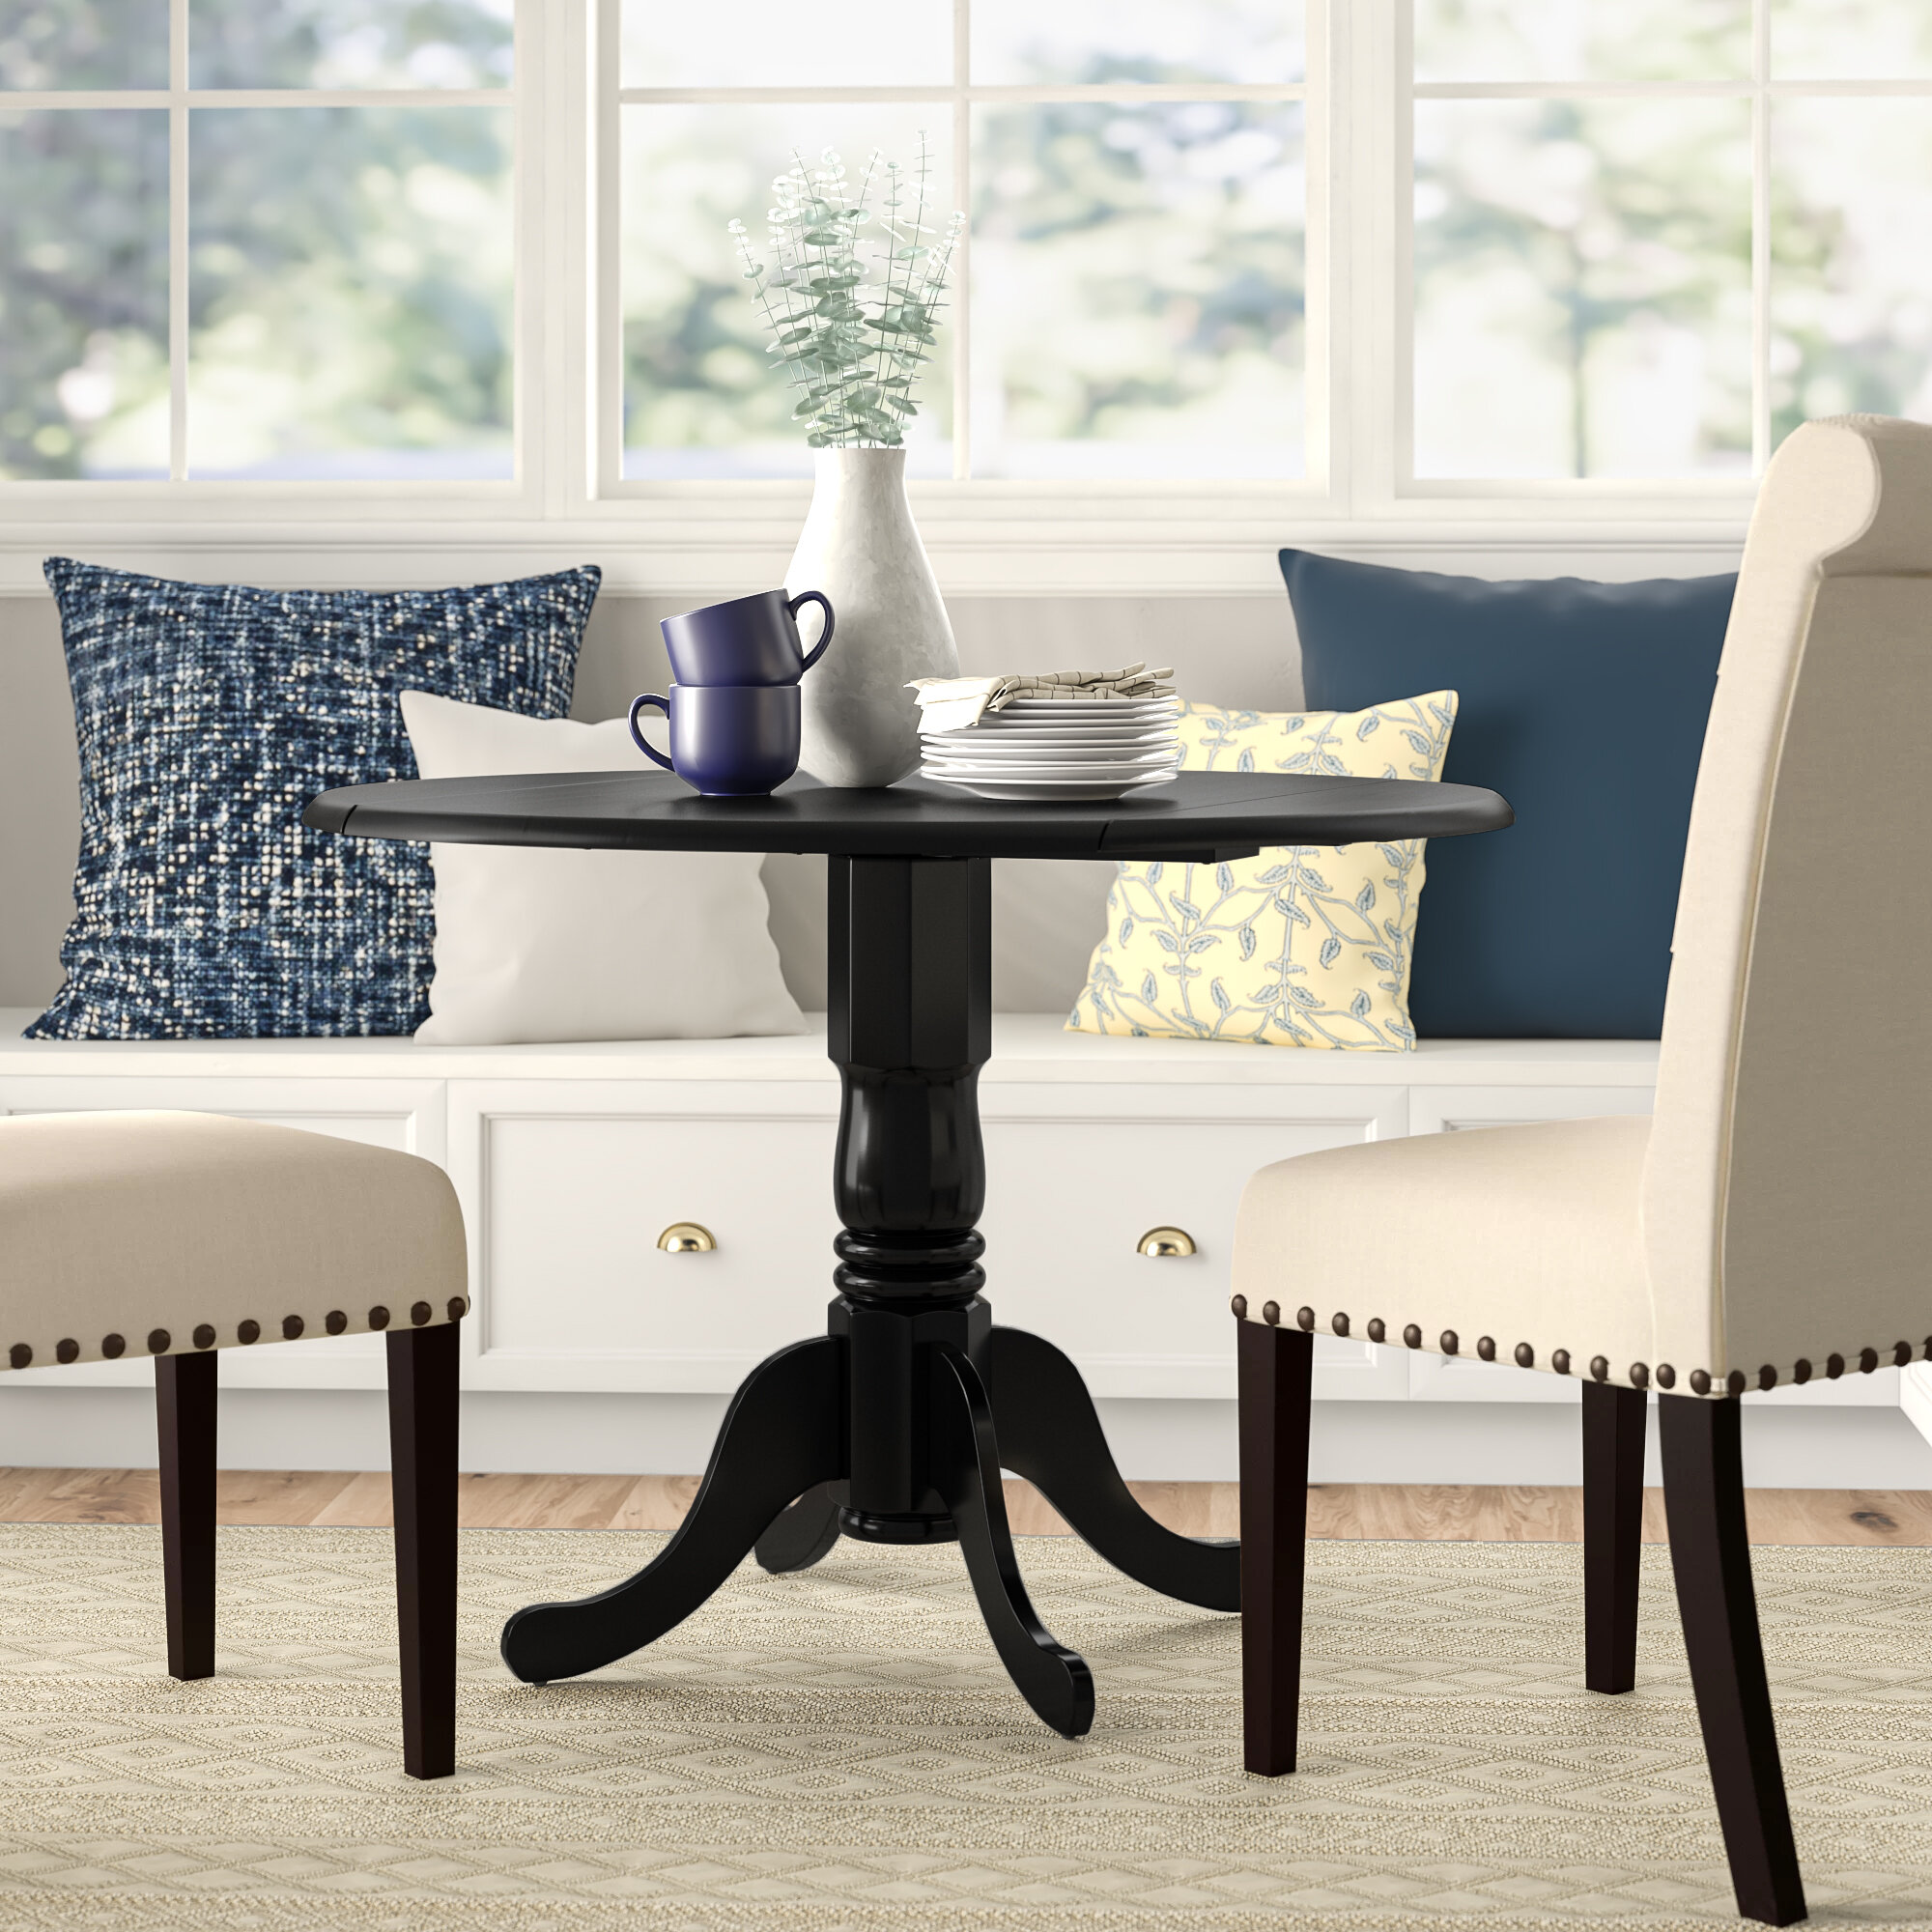 Wayfair | Round Kitchen & Dining Tables You'll Love in 2022